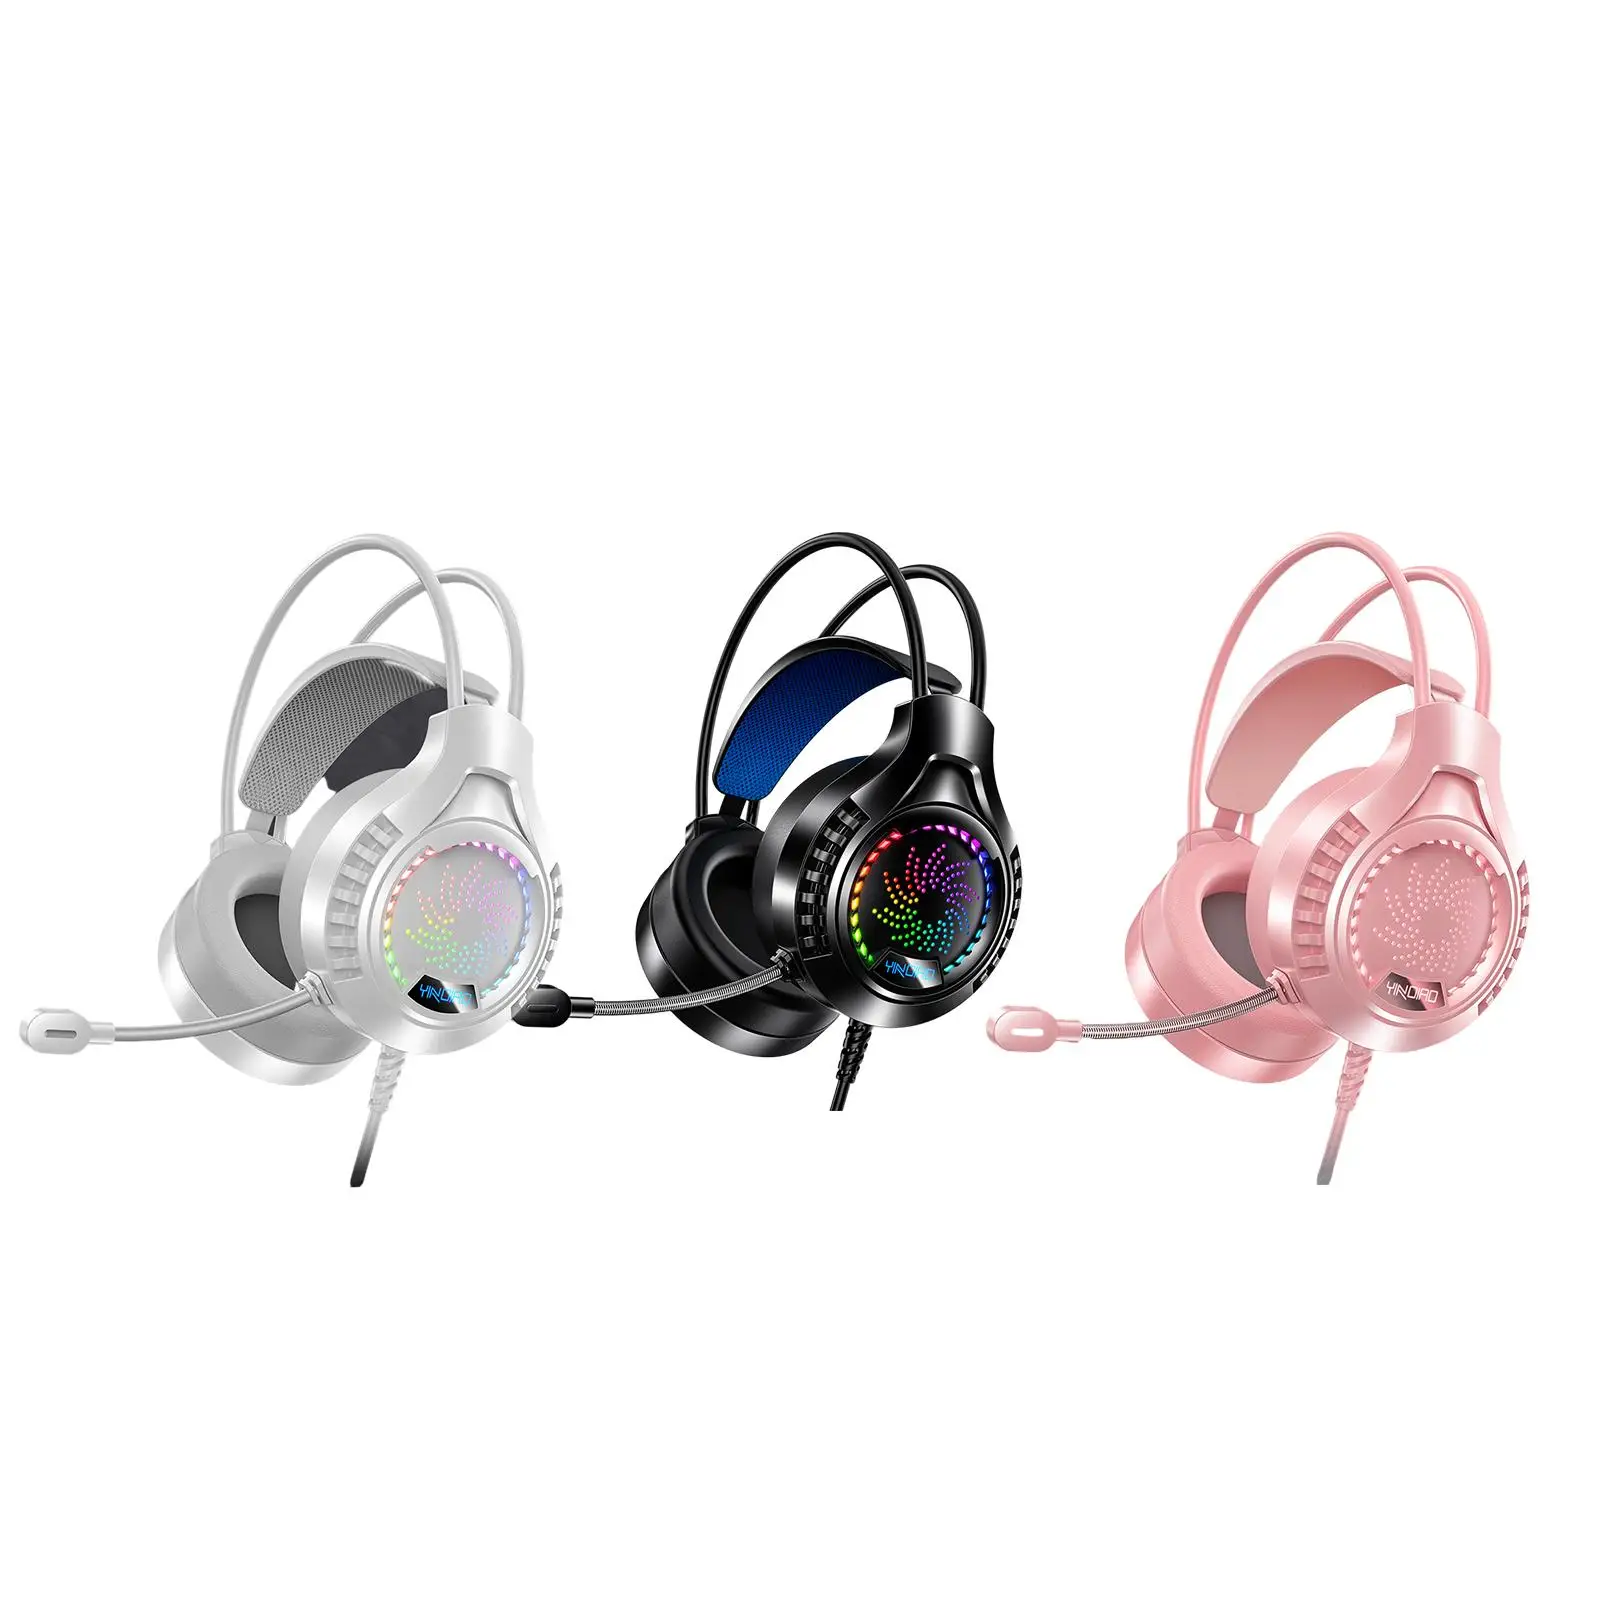  Gaming Headset Headphones Over-Ear Earcups Noise Canceling W/ Mic for PC Laptop Classroom with 3D Stereo Sound